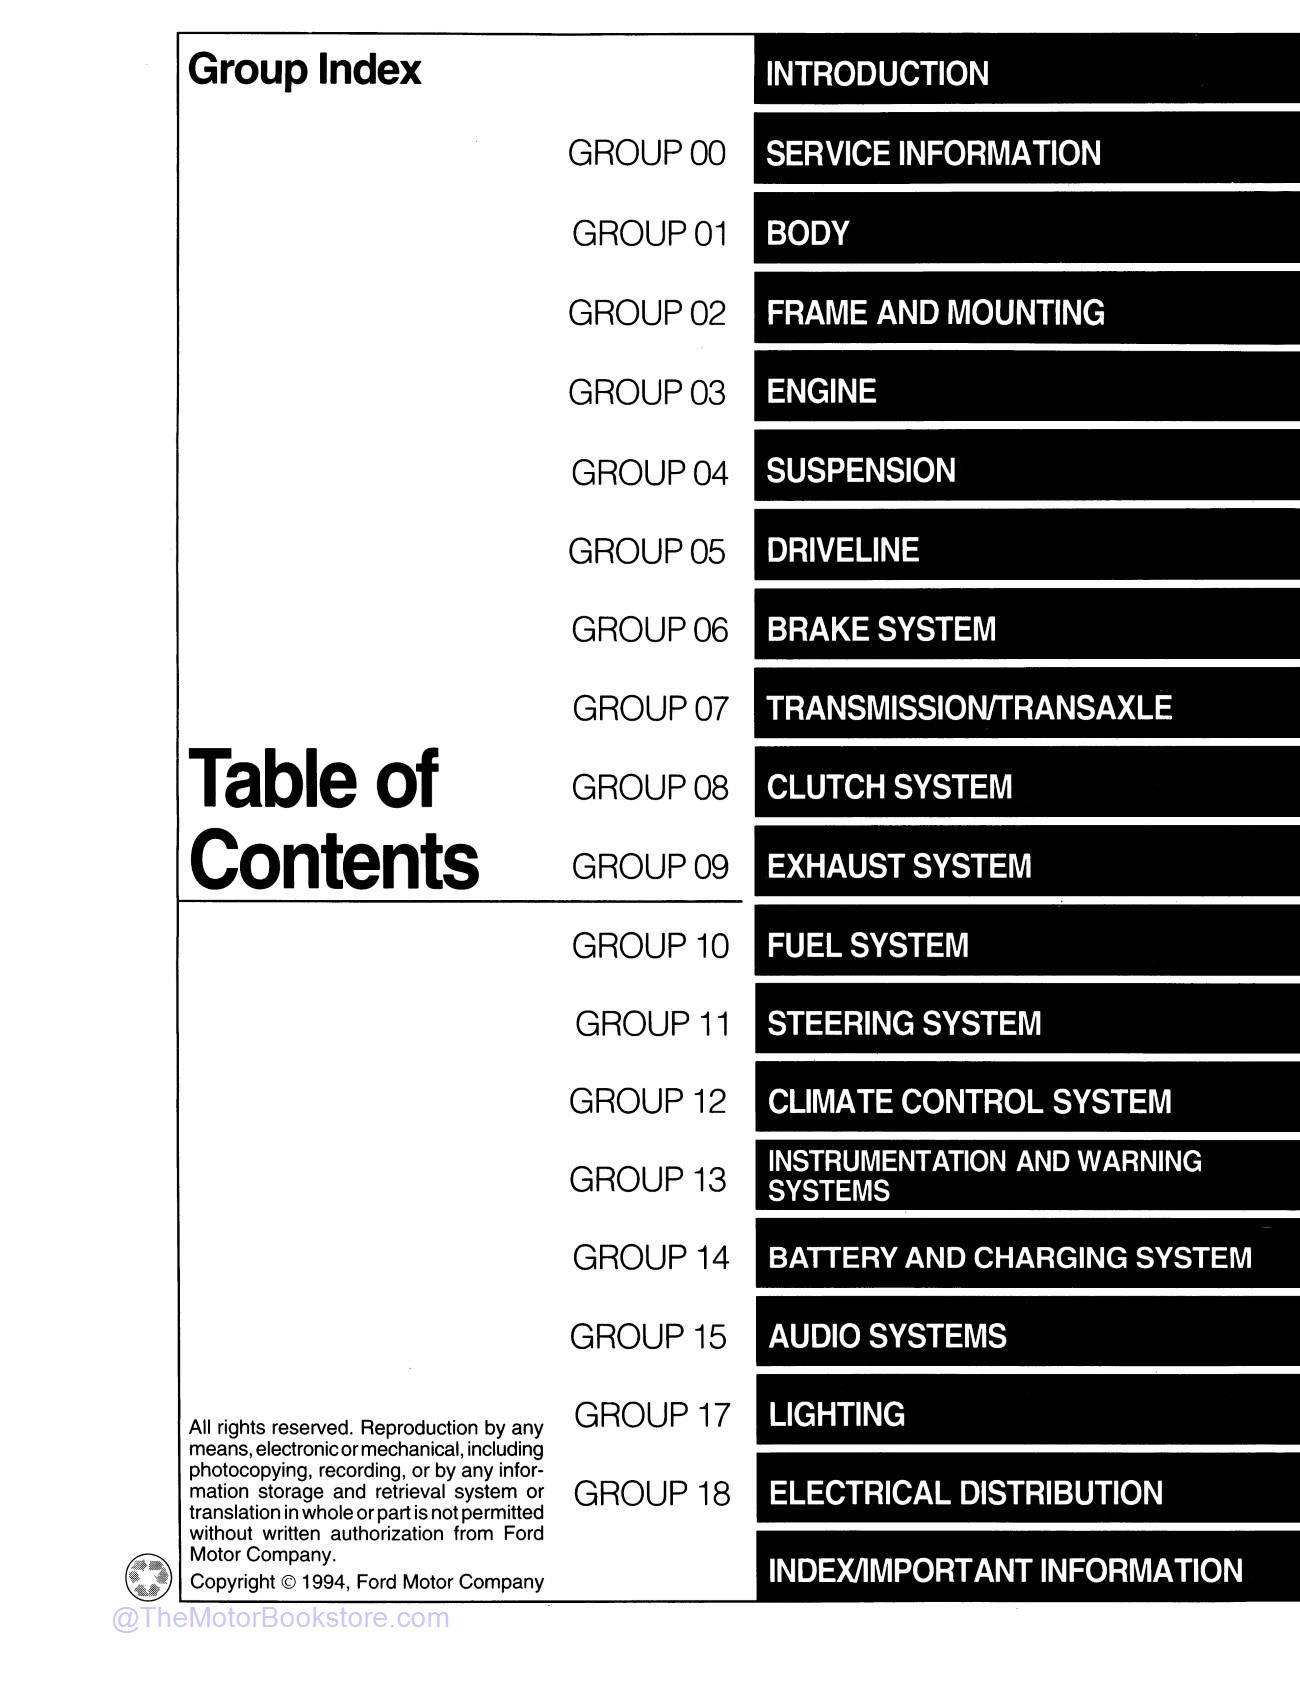 1995 Ford Mustang Service Manual  - Table of Contents